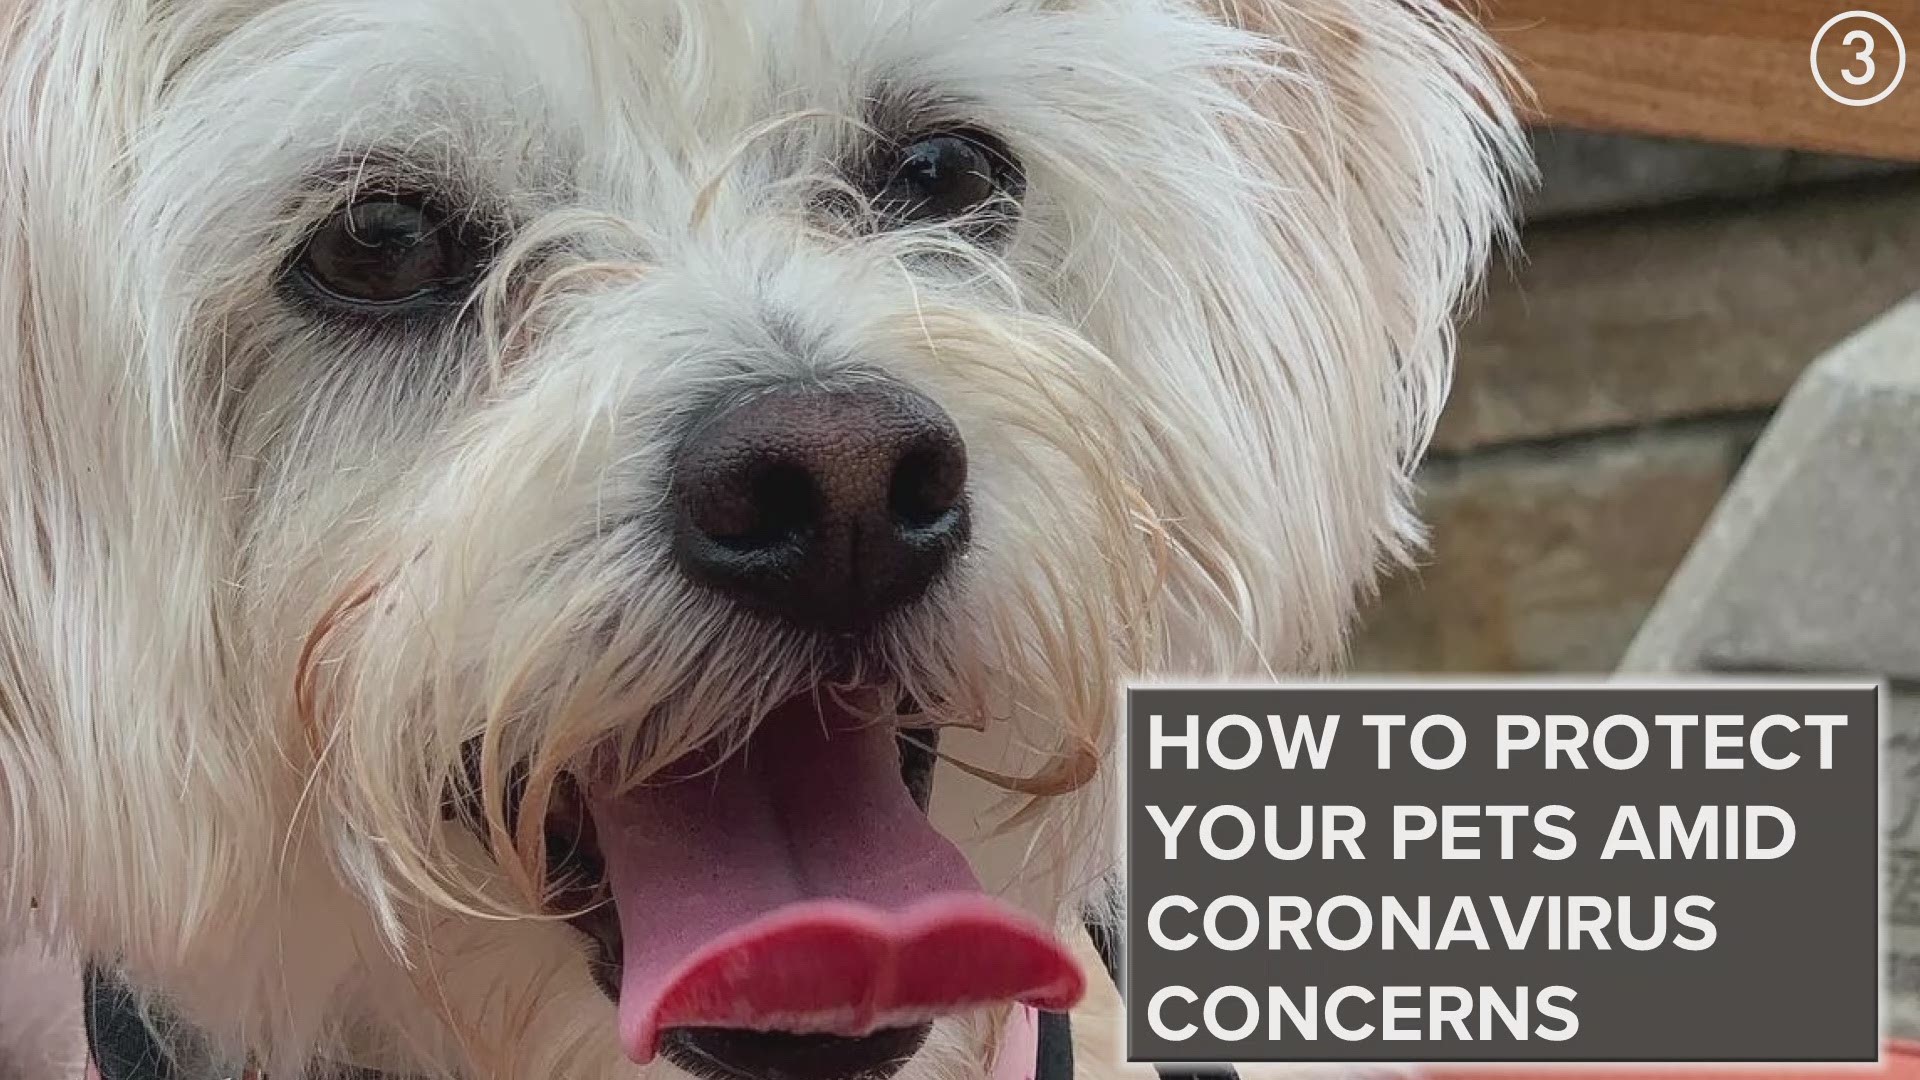 Listen up pet owners!  Better safe than sorry.